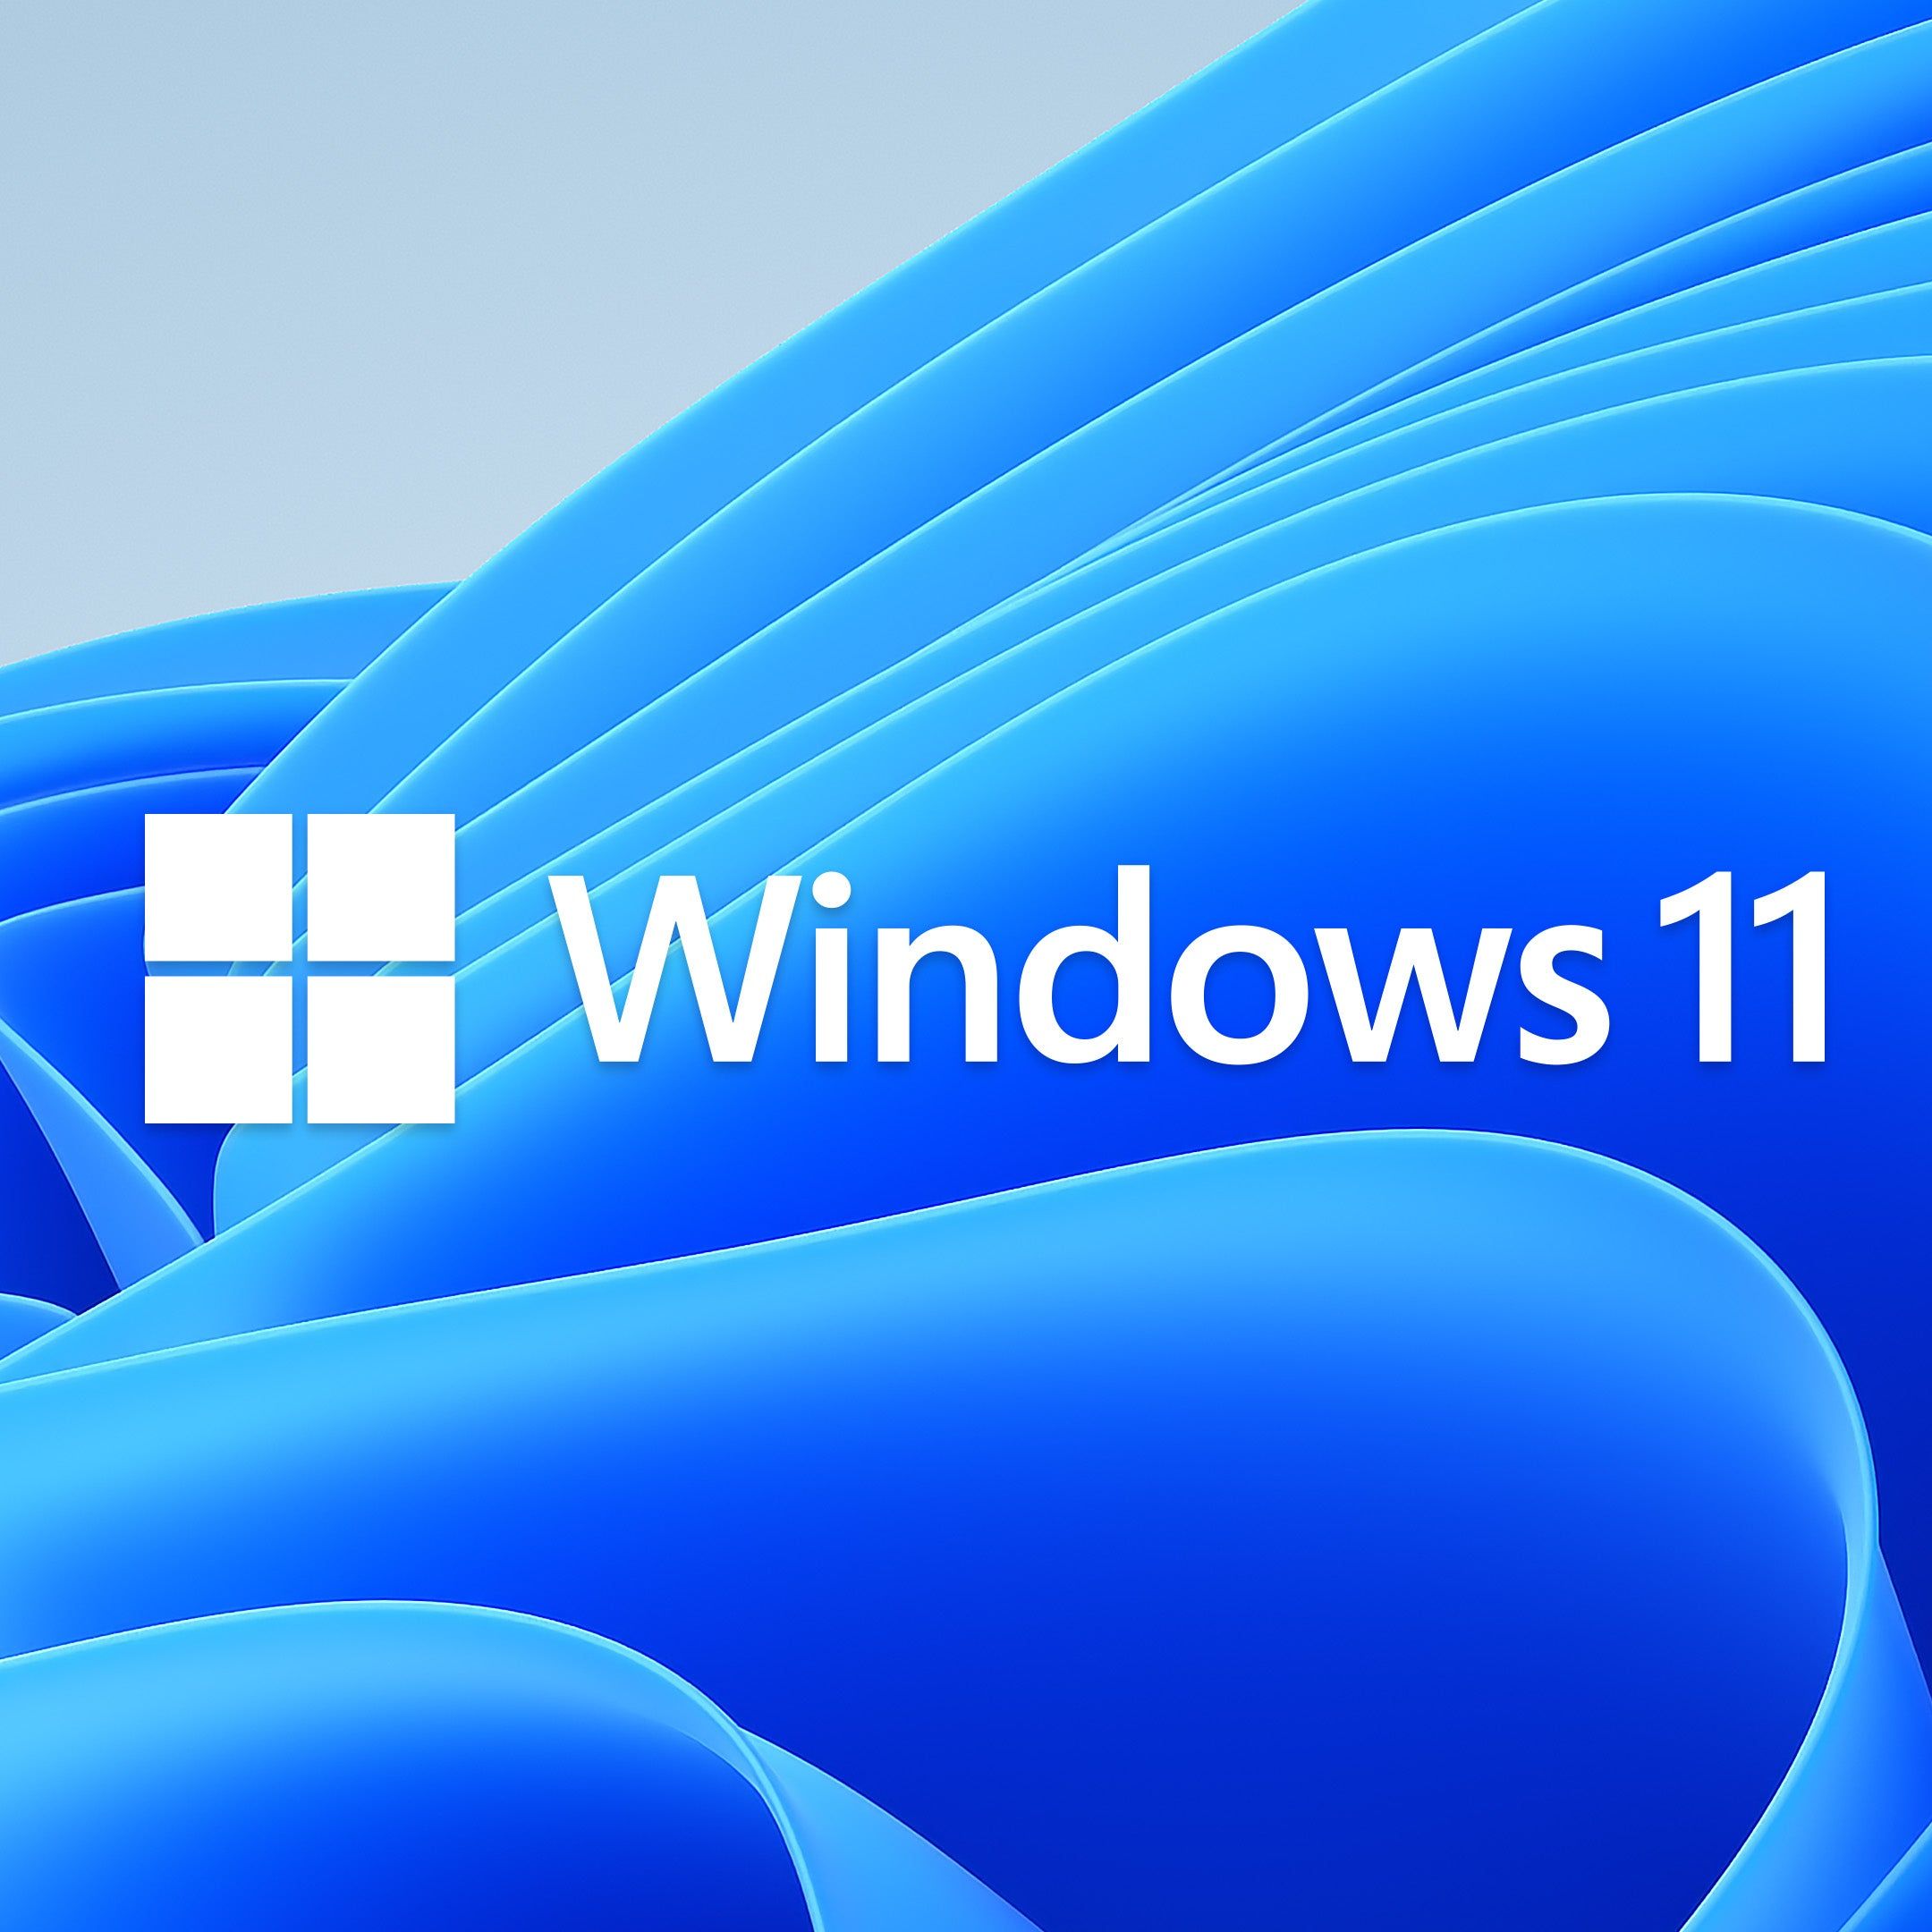 Windows 11 deemed to have stability issues, says Microsoft